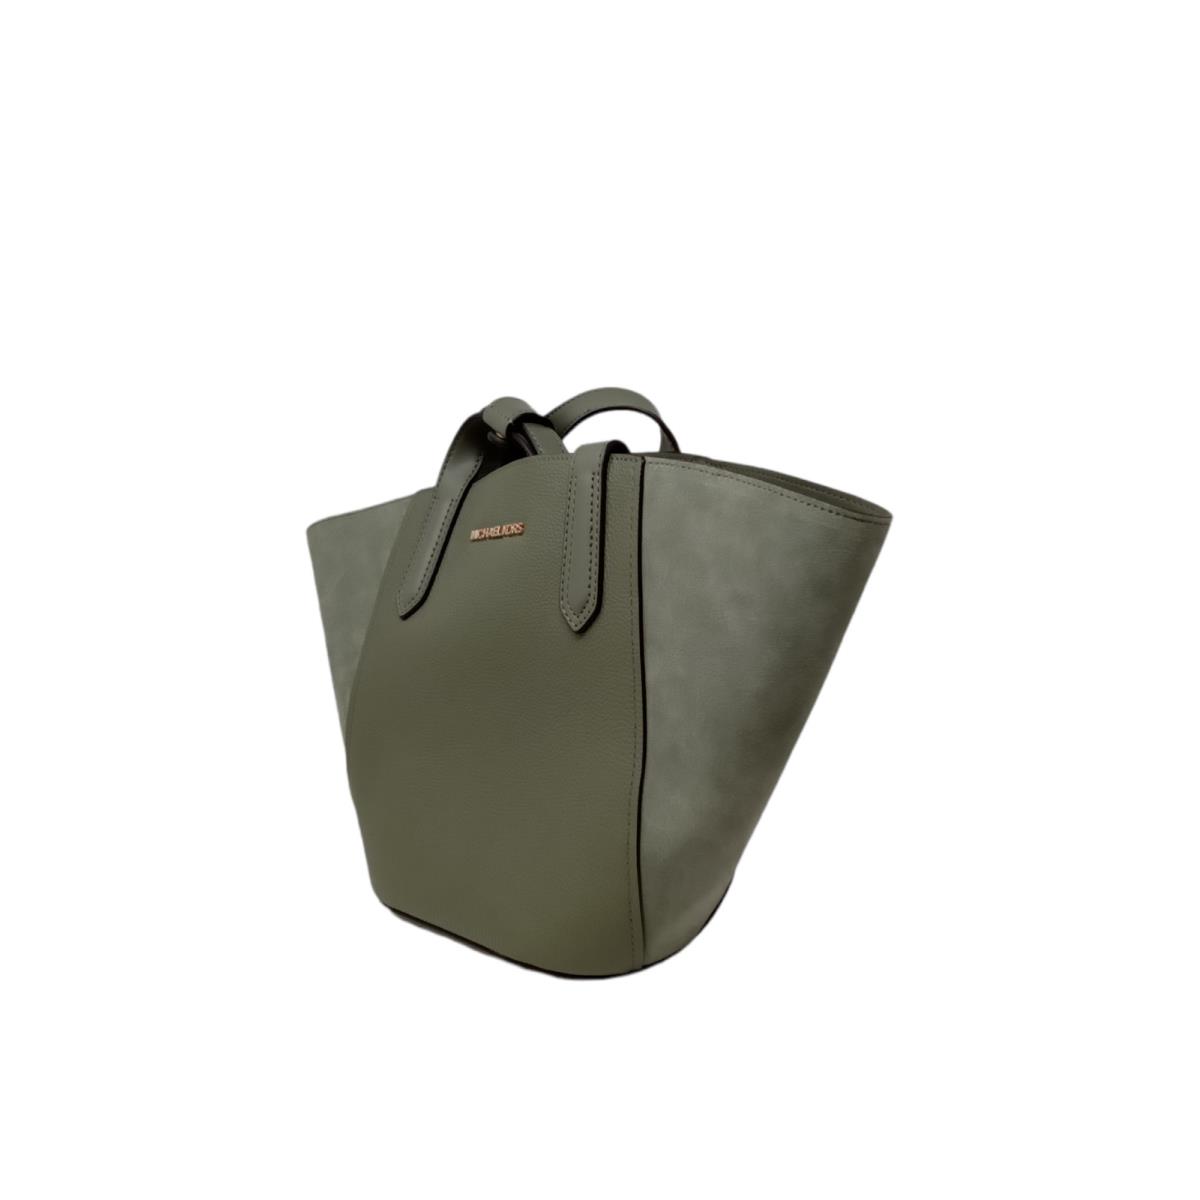 Michael Kors Portia Small Tote Army Green Leather - Green Lining, Army Green Exterior